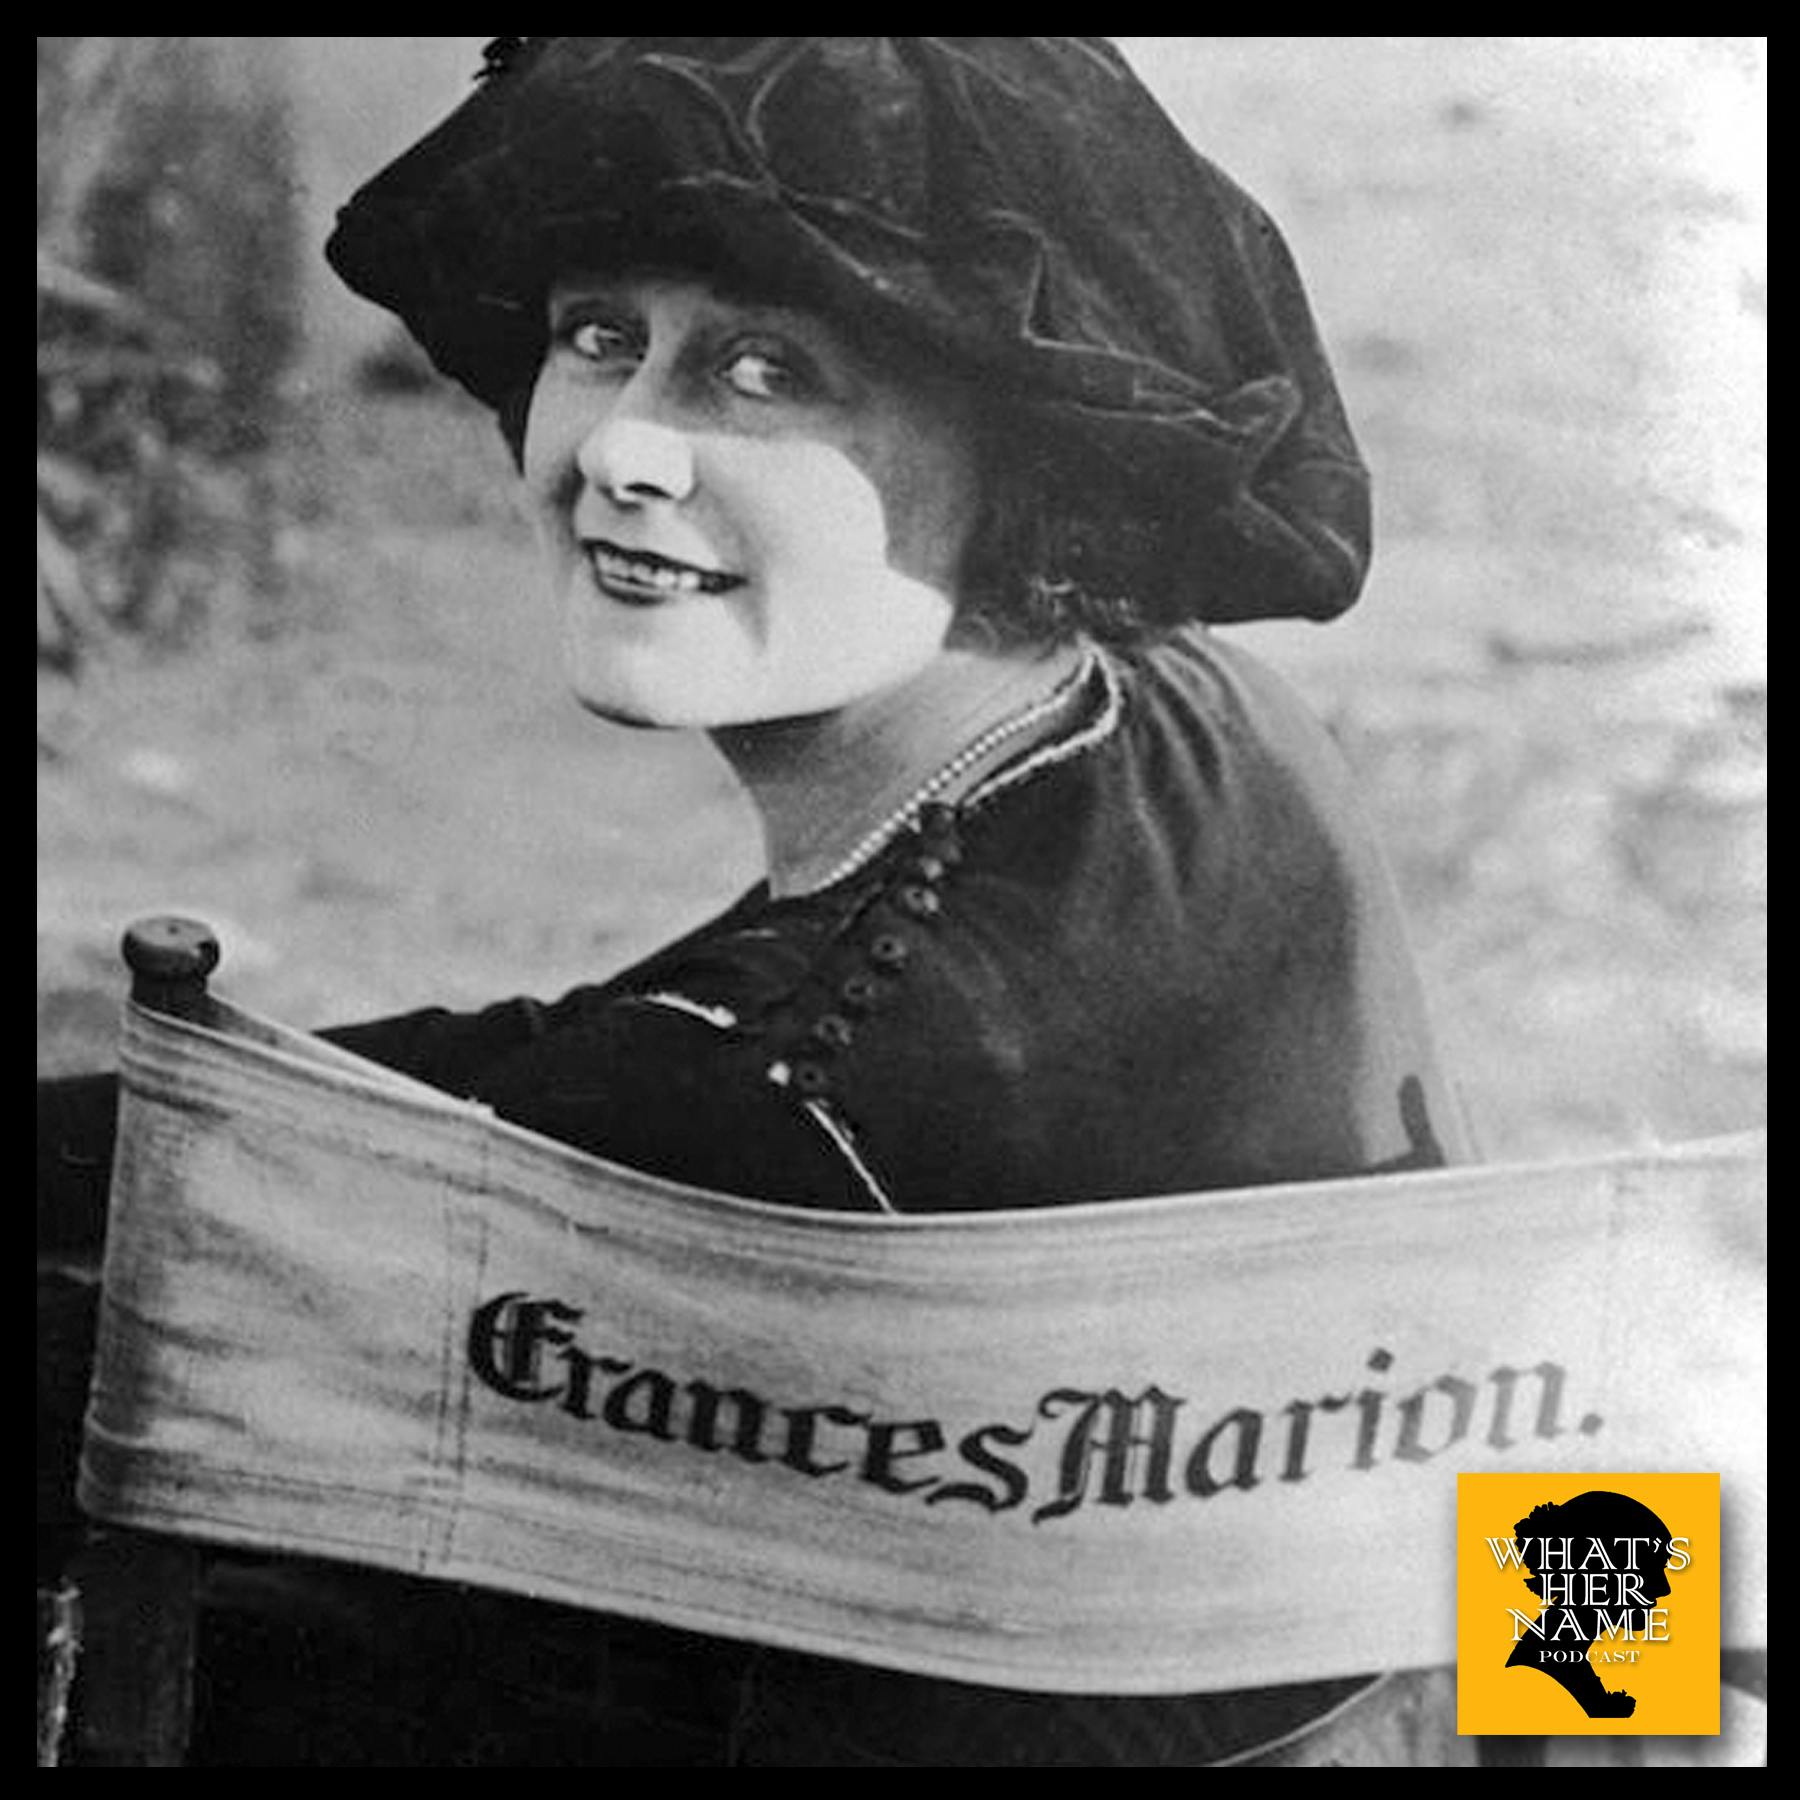 THE SCREENWRITER Frances Marion